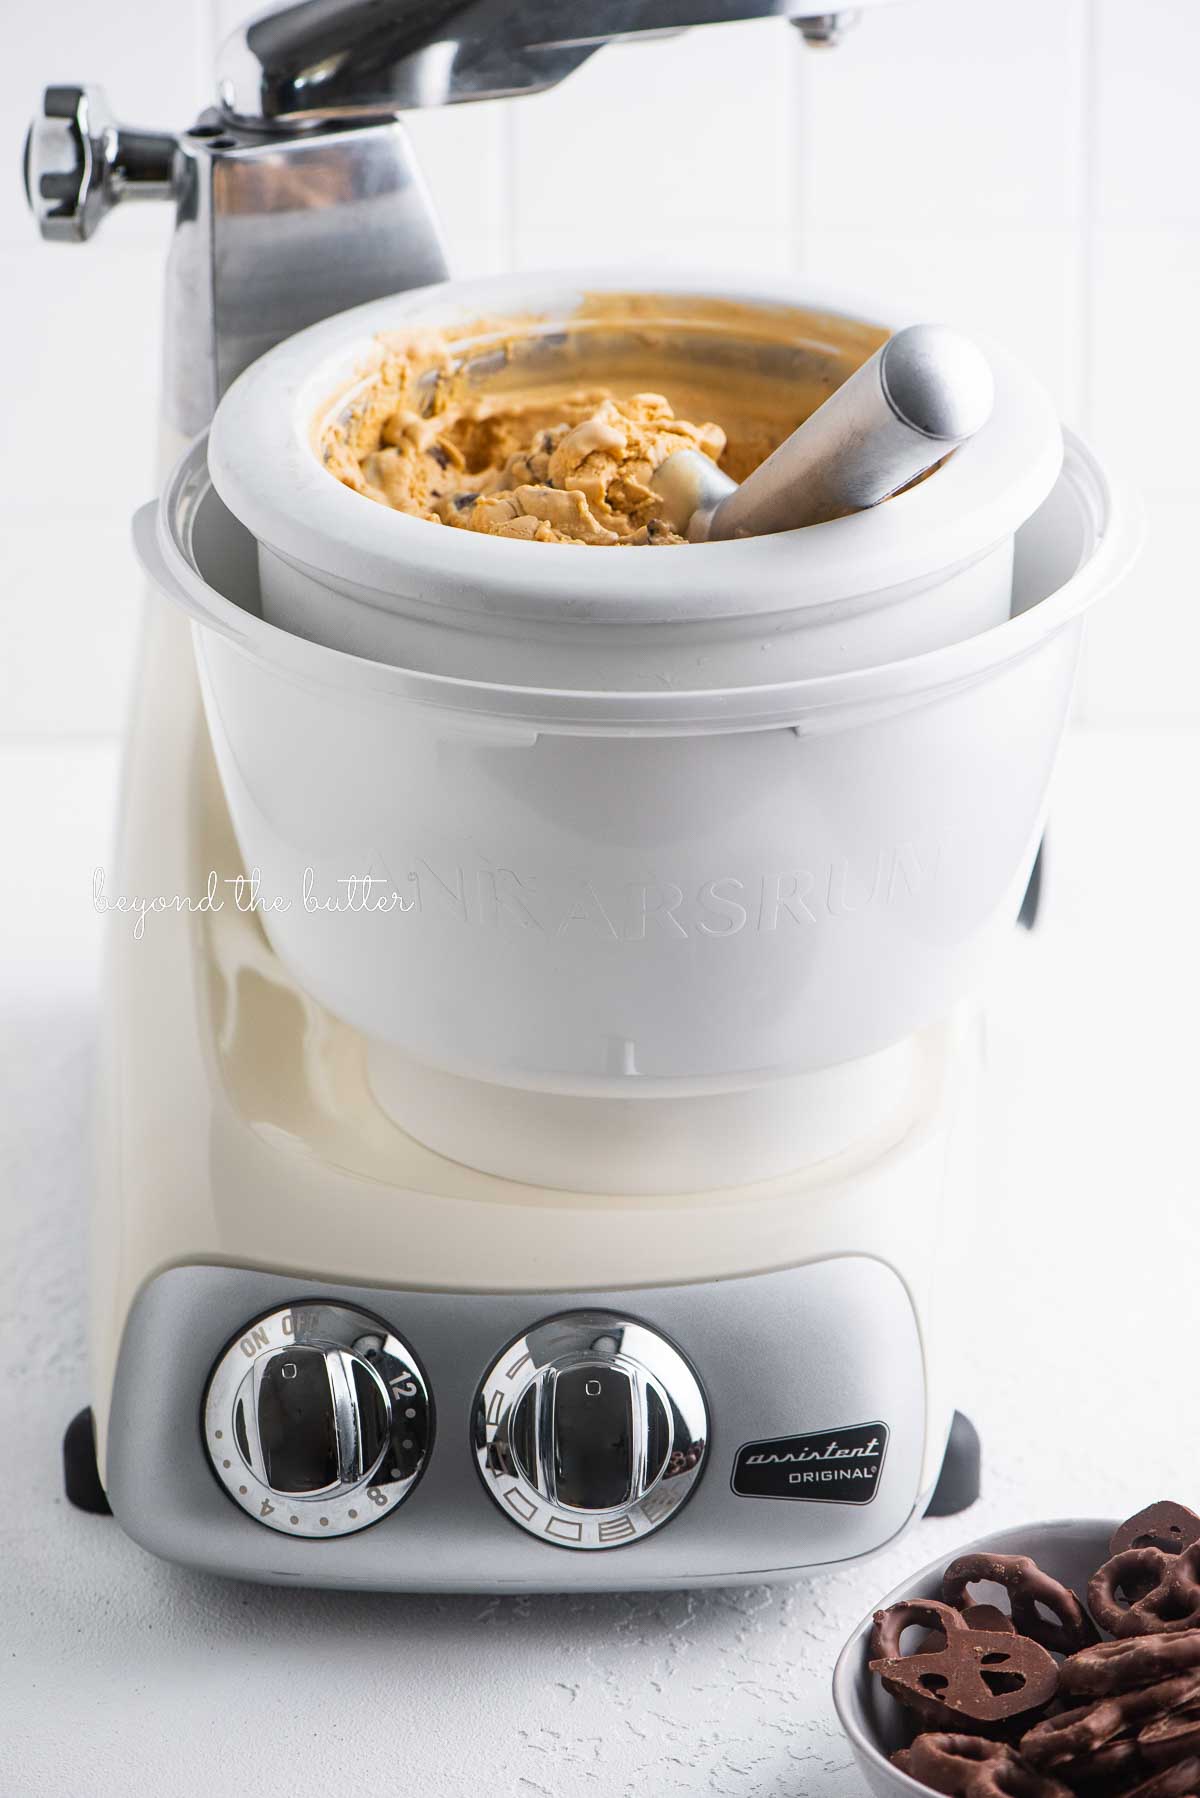 Dulce de leche ice cream made in an Ankarsrum Assistent Original with the ice cream maker attachment | © Beyond the Butter